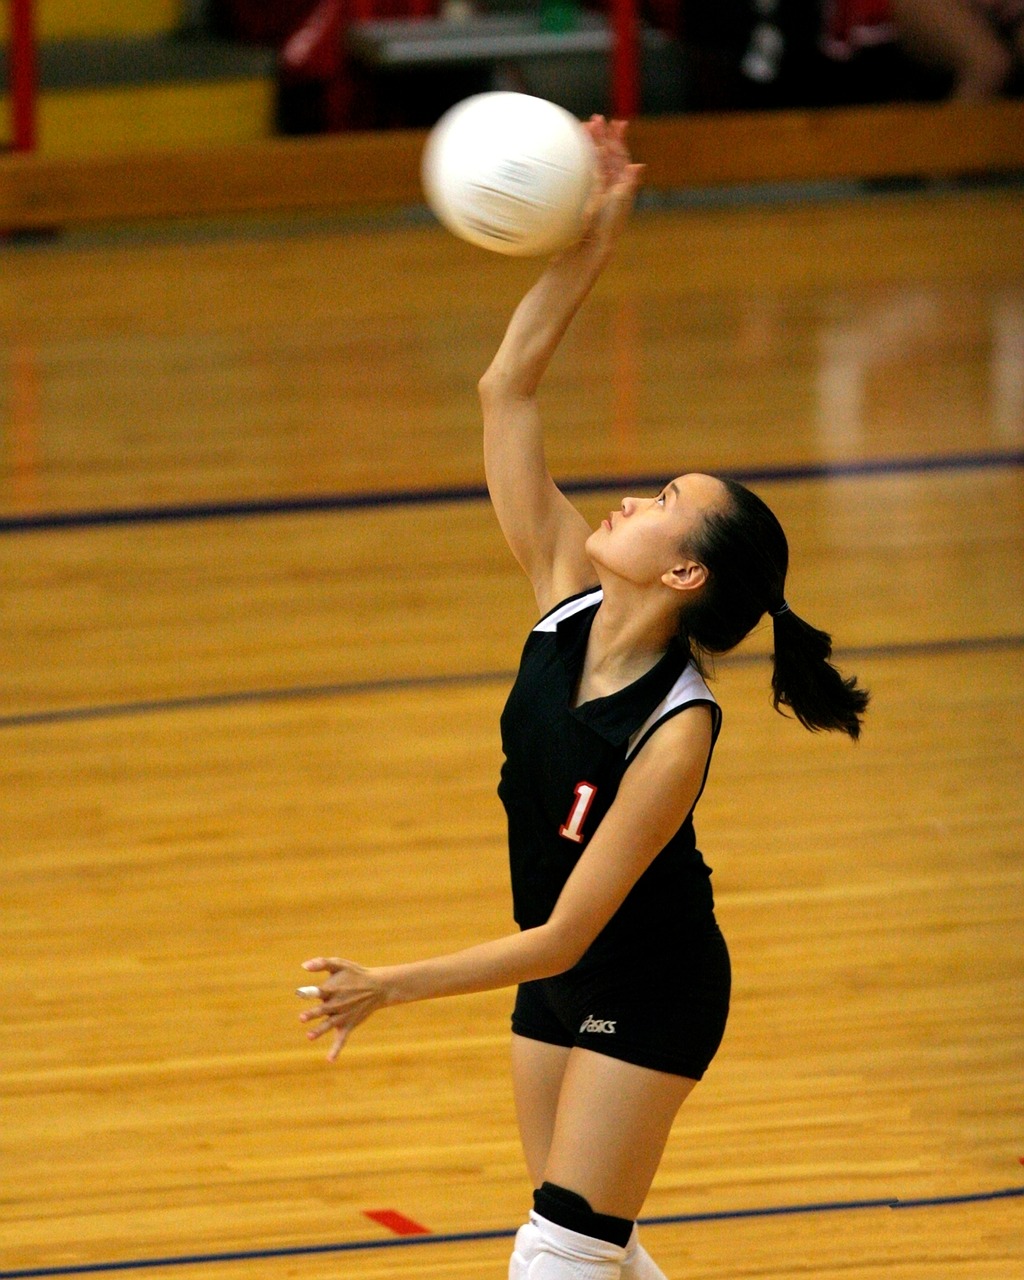 volleyball player action free photo